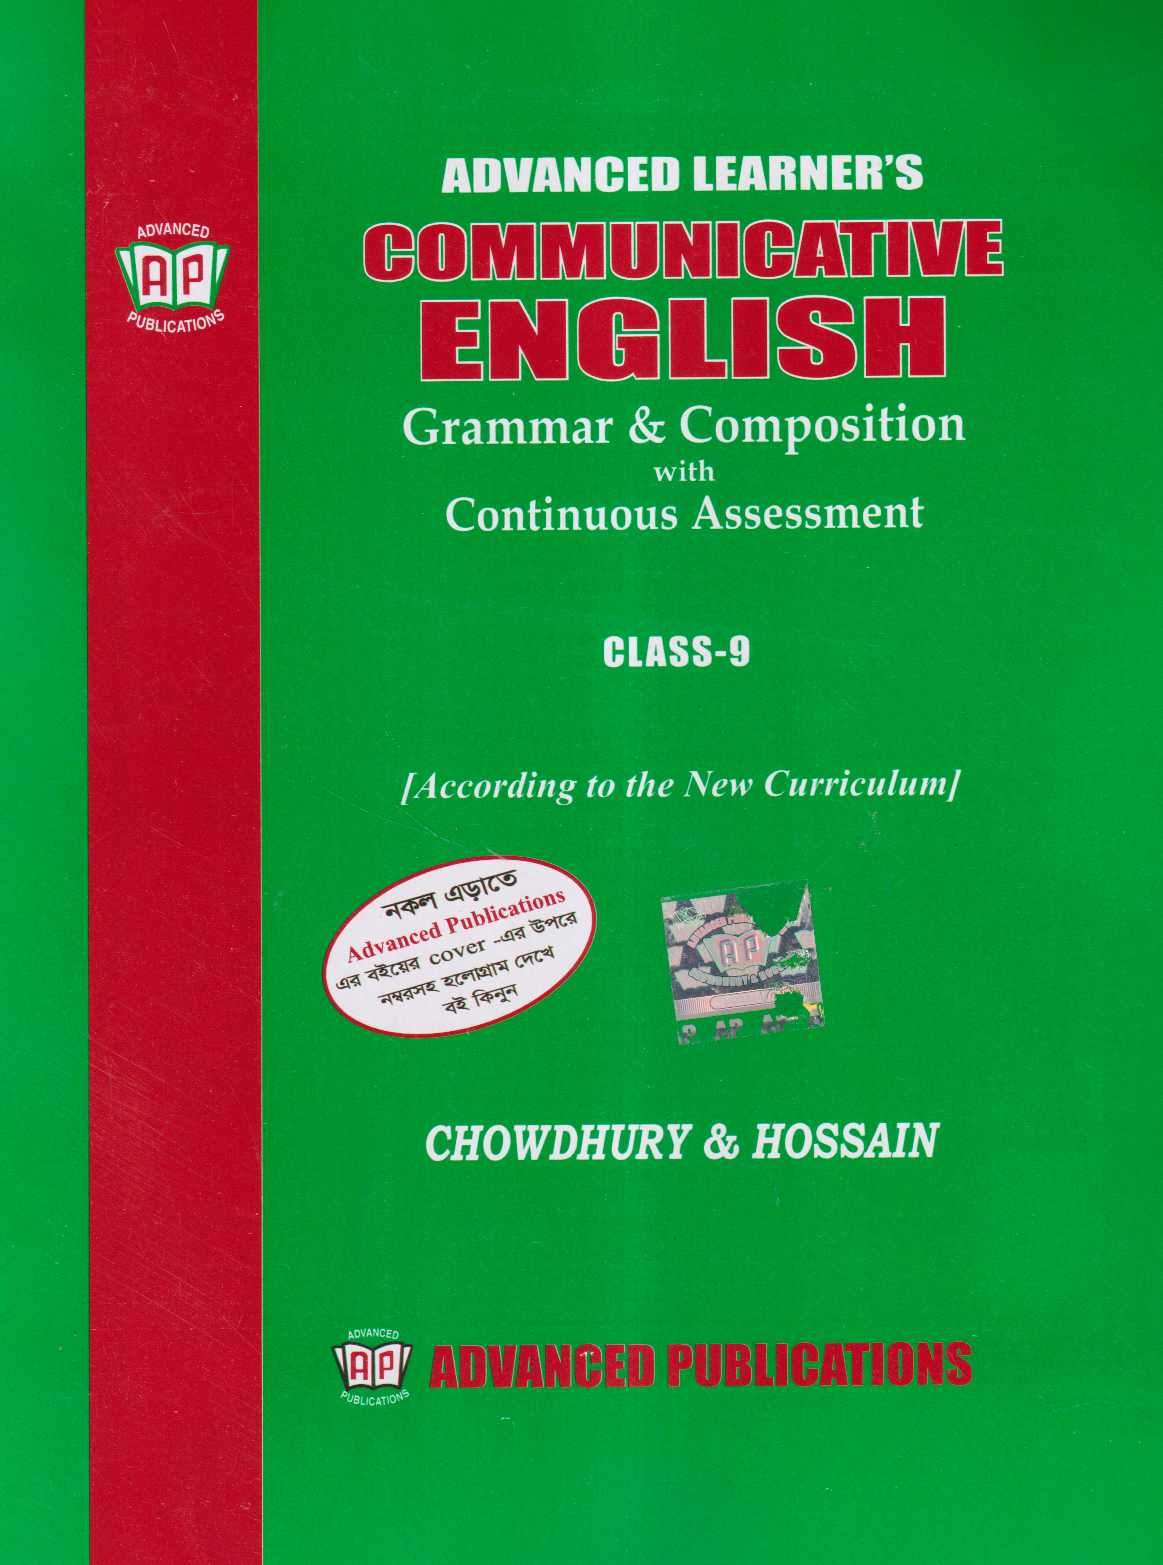 Advanced Learner's Communicative English Grammar & Composition with Continuous Assessment With Solution For Class-9 (Bangla Version) (পেপারব্যাক)